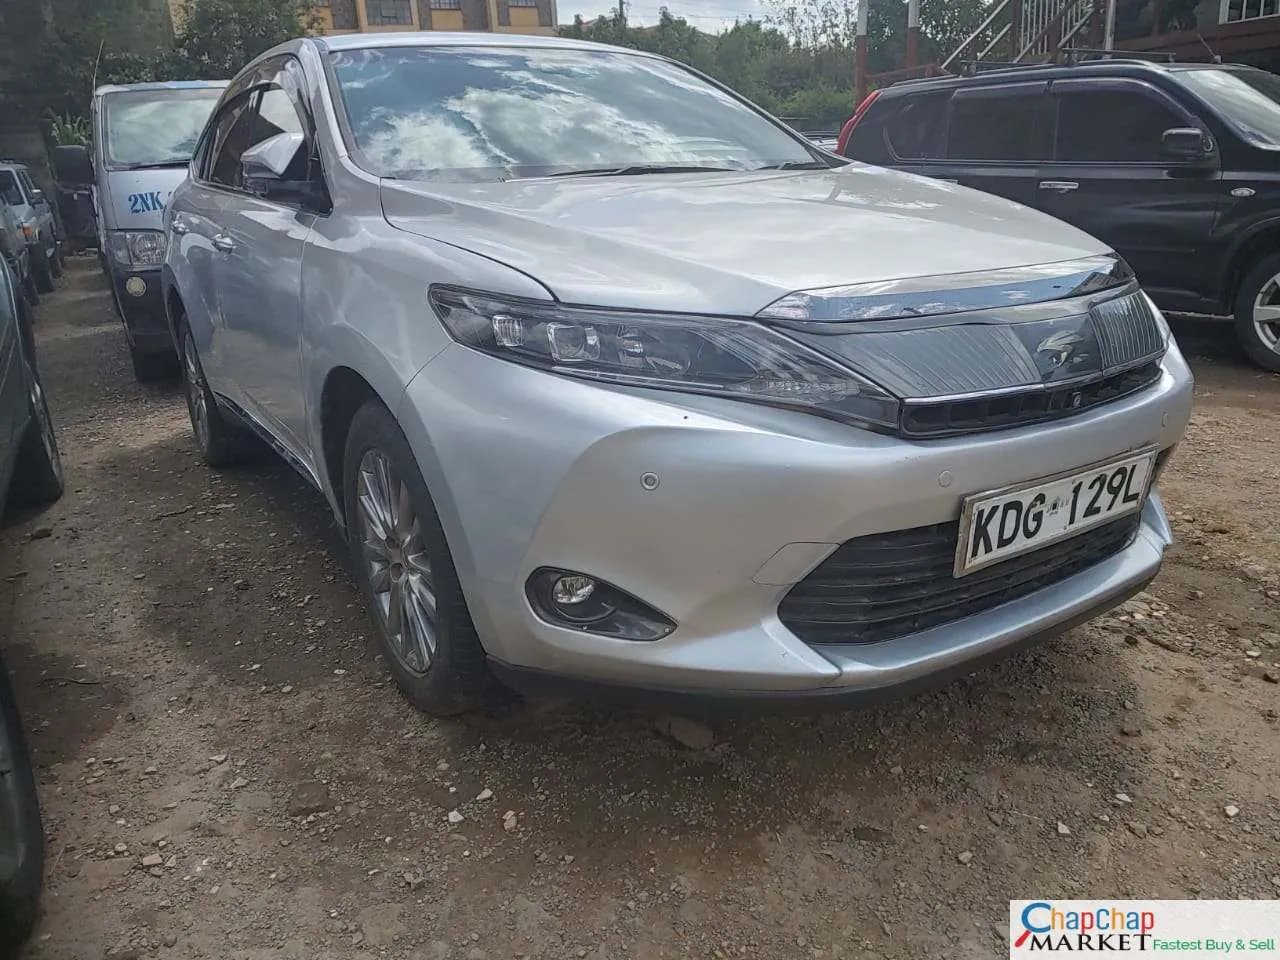 Toyota Harrier for Sale in Kenya New shape You Pay 30% Deposit Trade in OK EXCLUSIVE 🔥